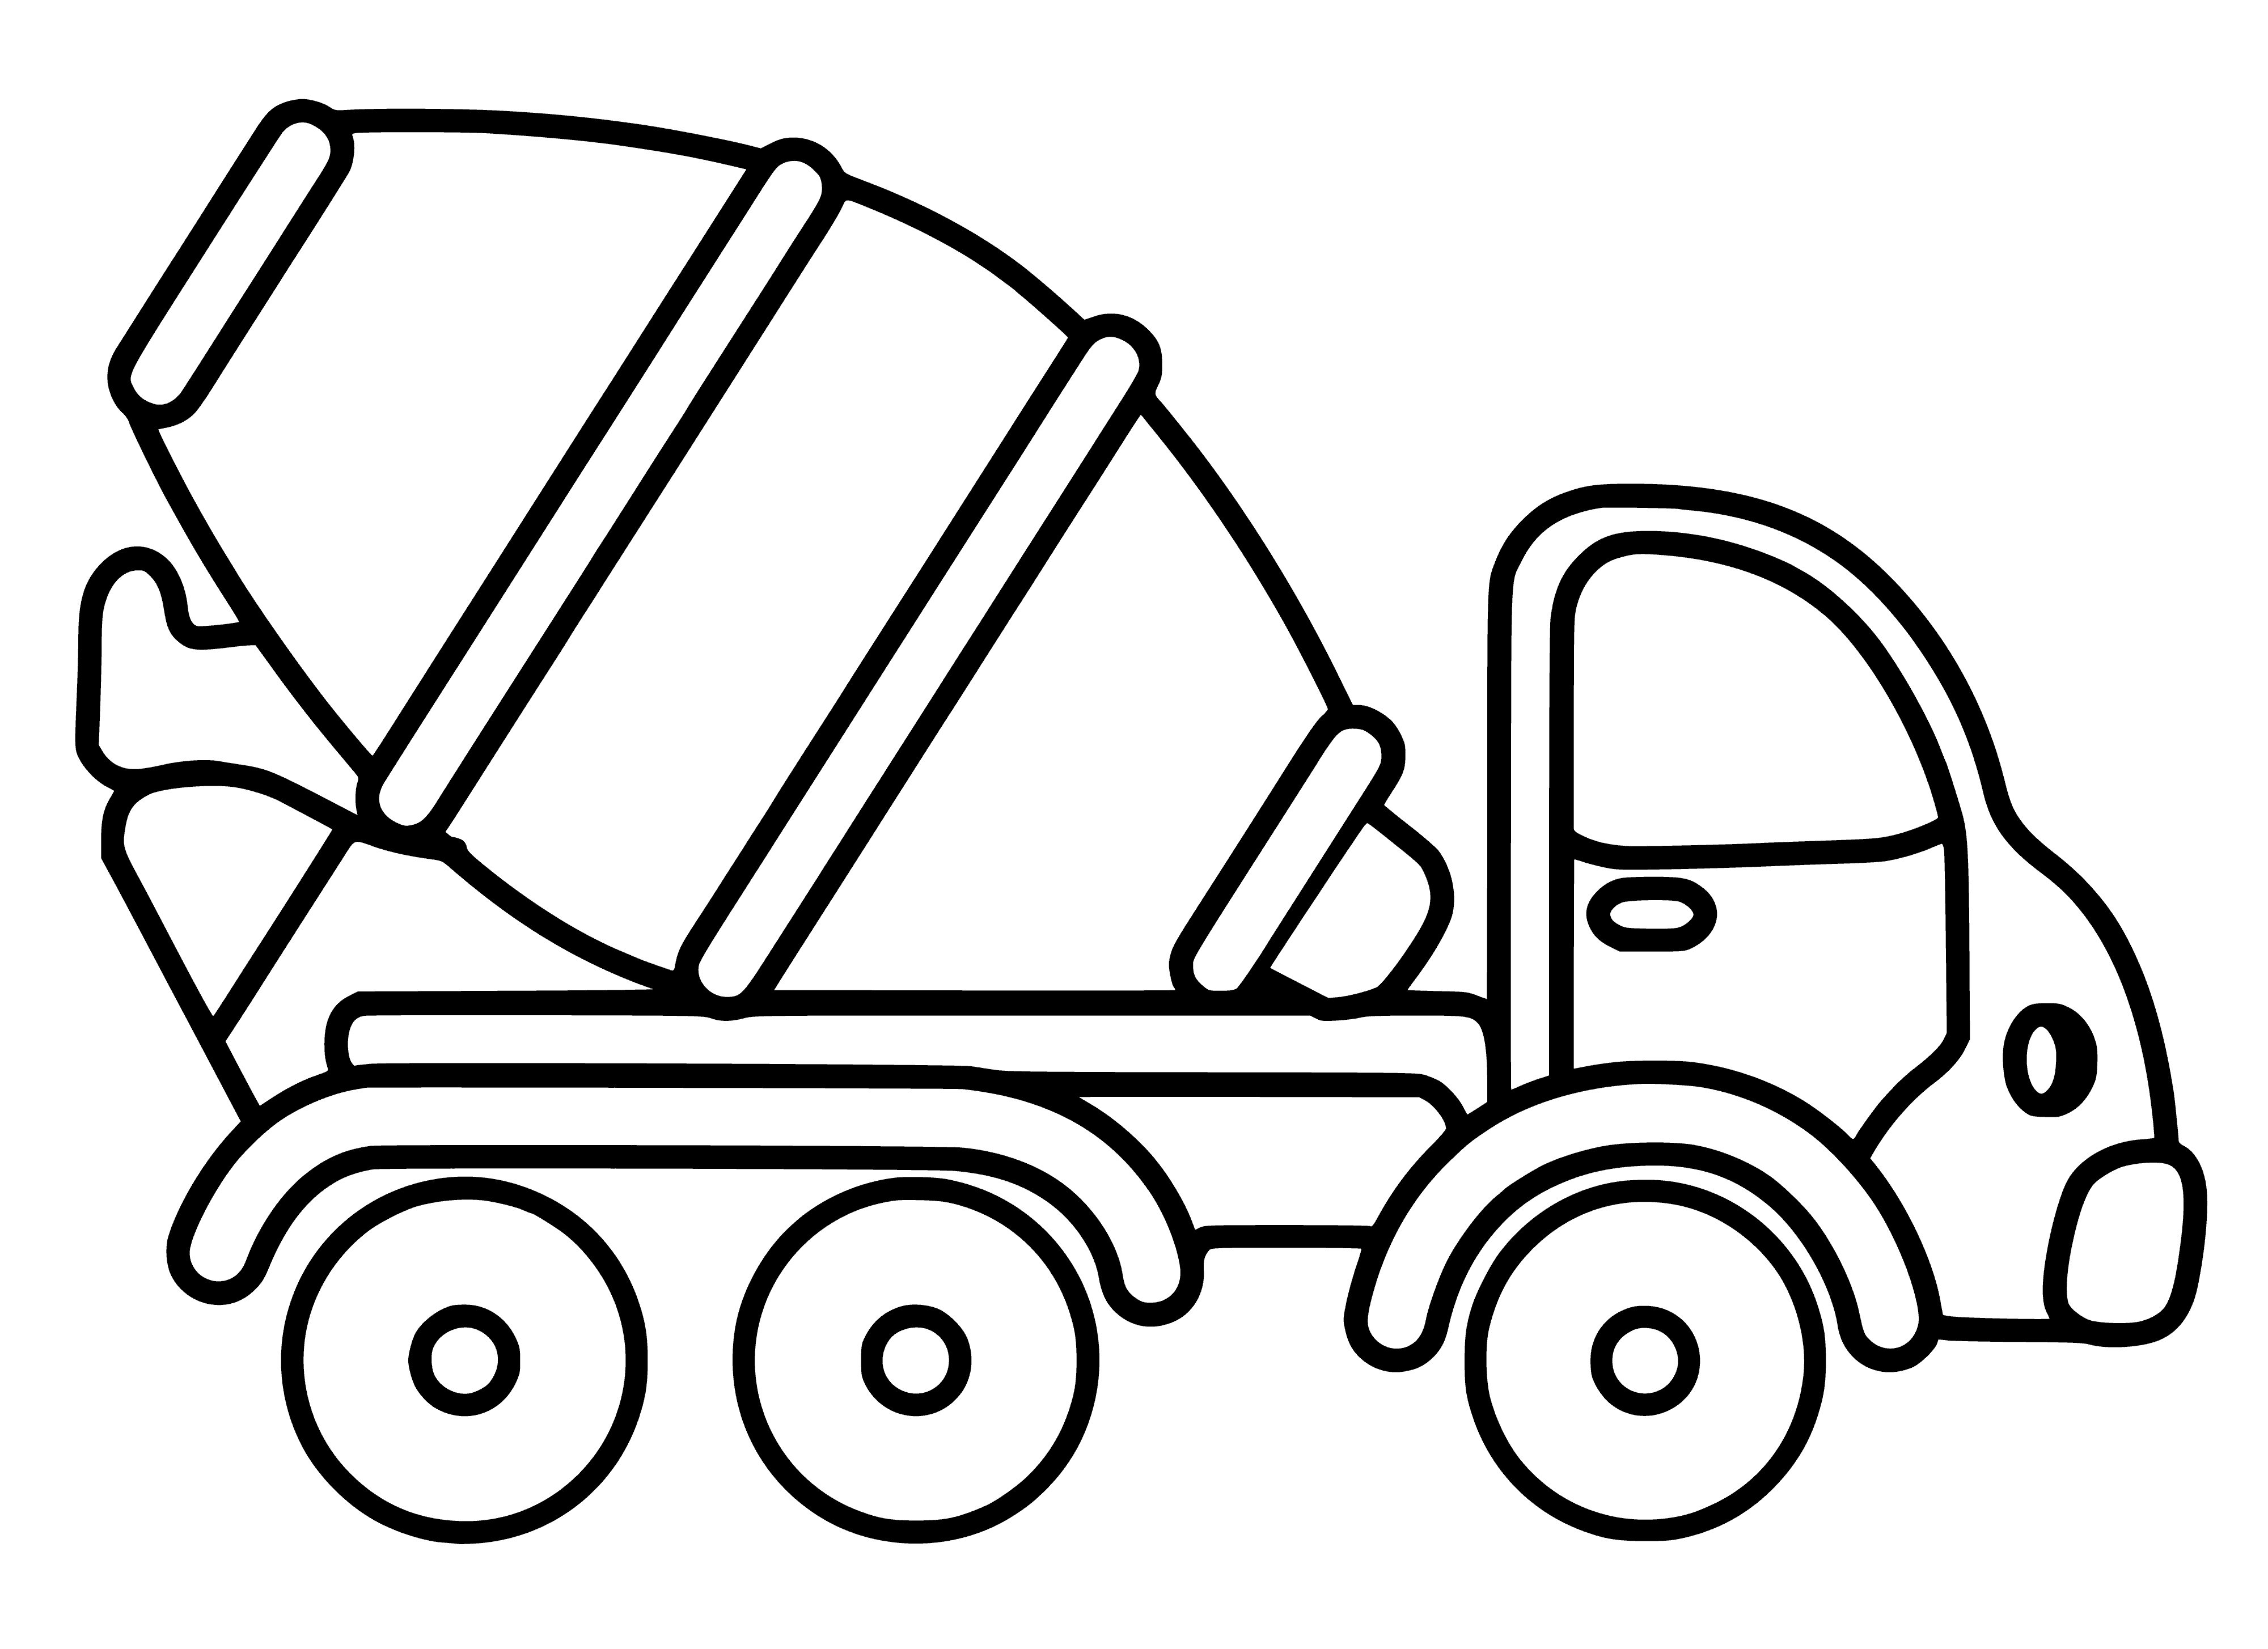 coloring page: Boy climbs onto giant, orange concrete mixer outside bright house, gripping handle high in the air.